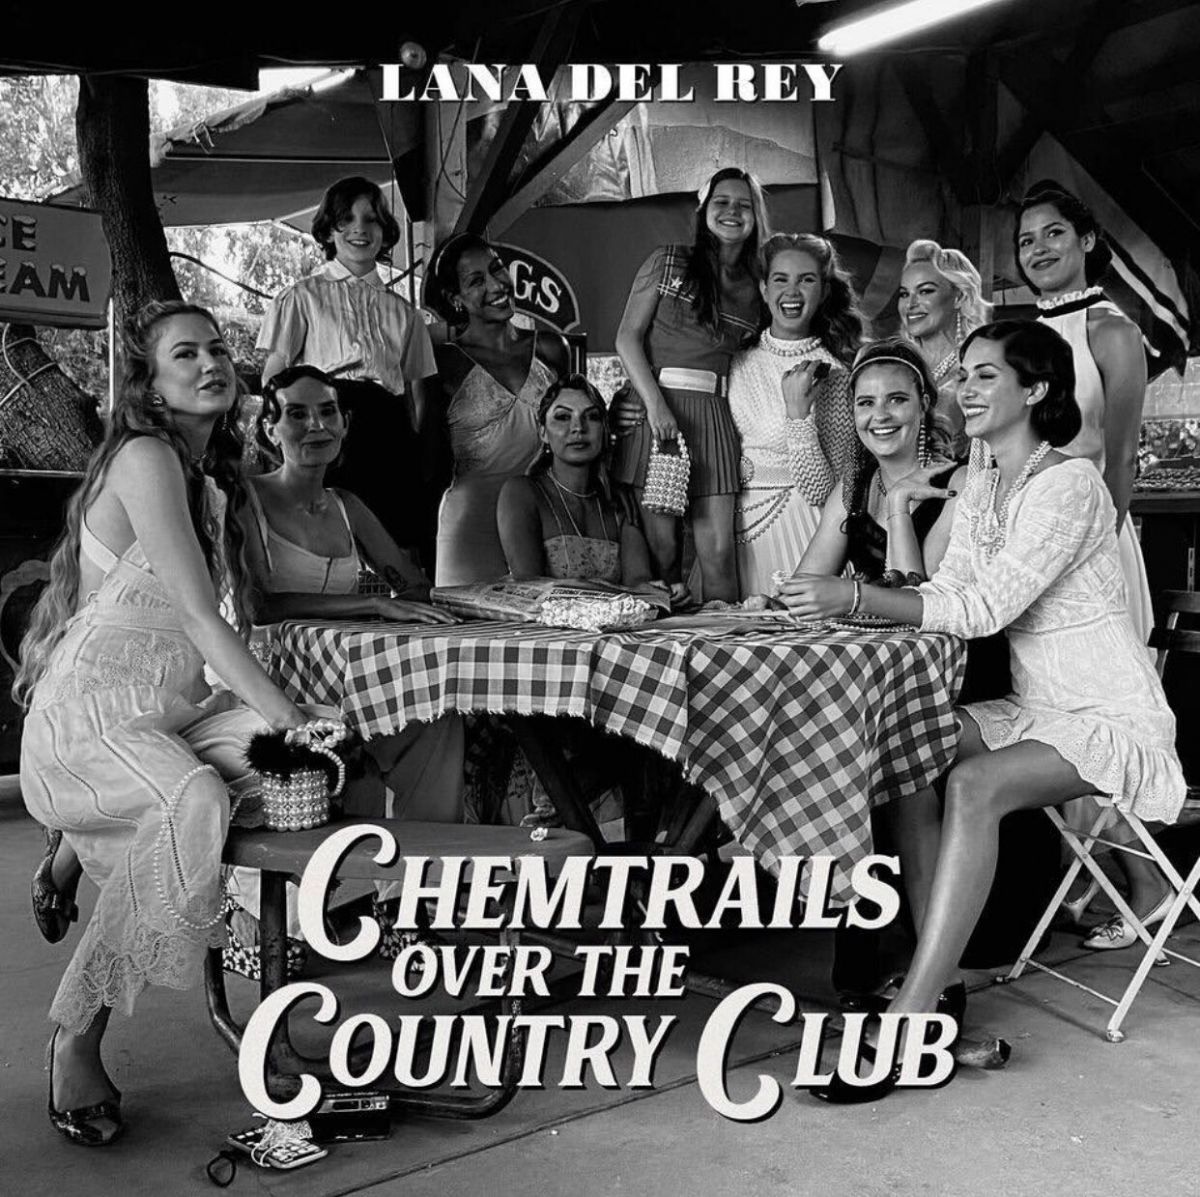 lana-del-rey-chemtrails-over-the-country-club-album-promos-2021-6.jpg